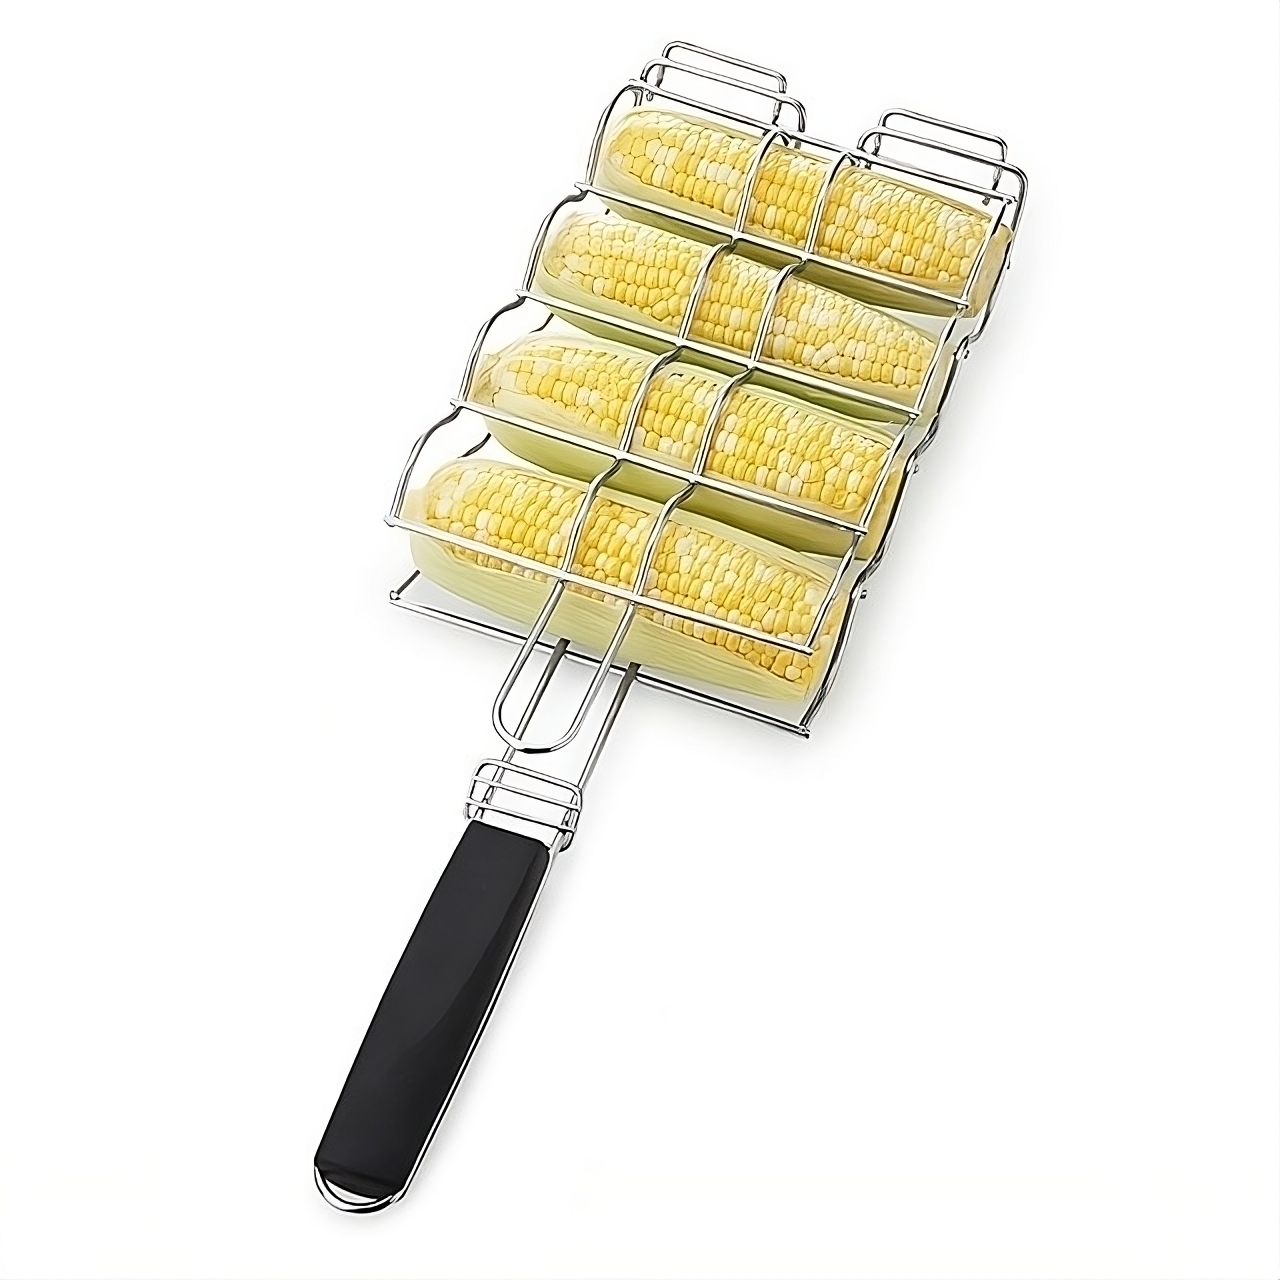 Grill Meister Corn on the Cob BBQ Basket - Perfect Grilling Every Time